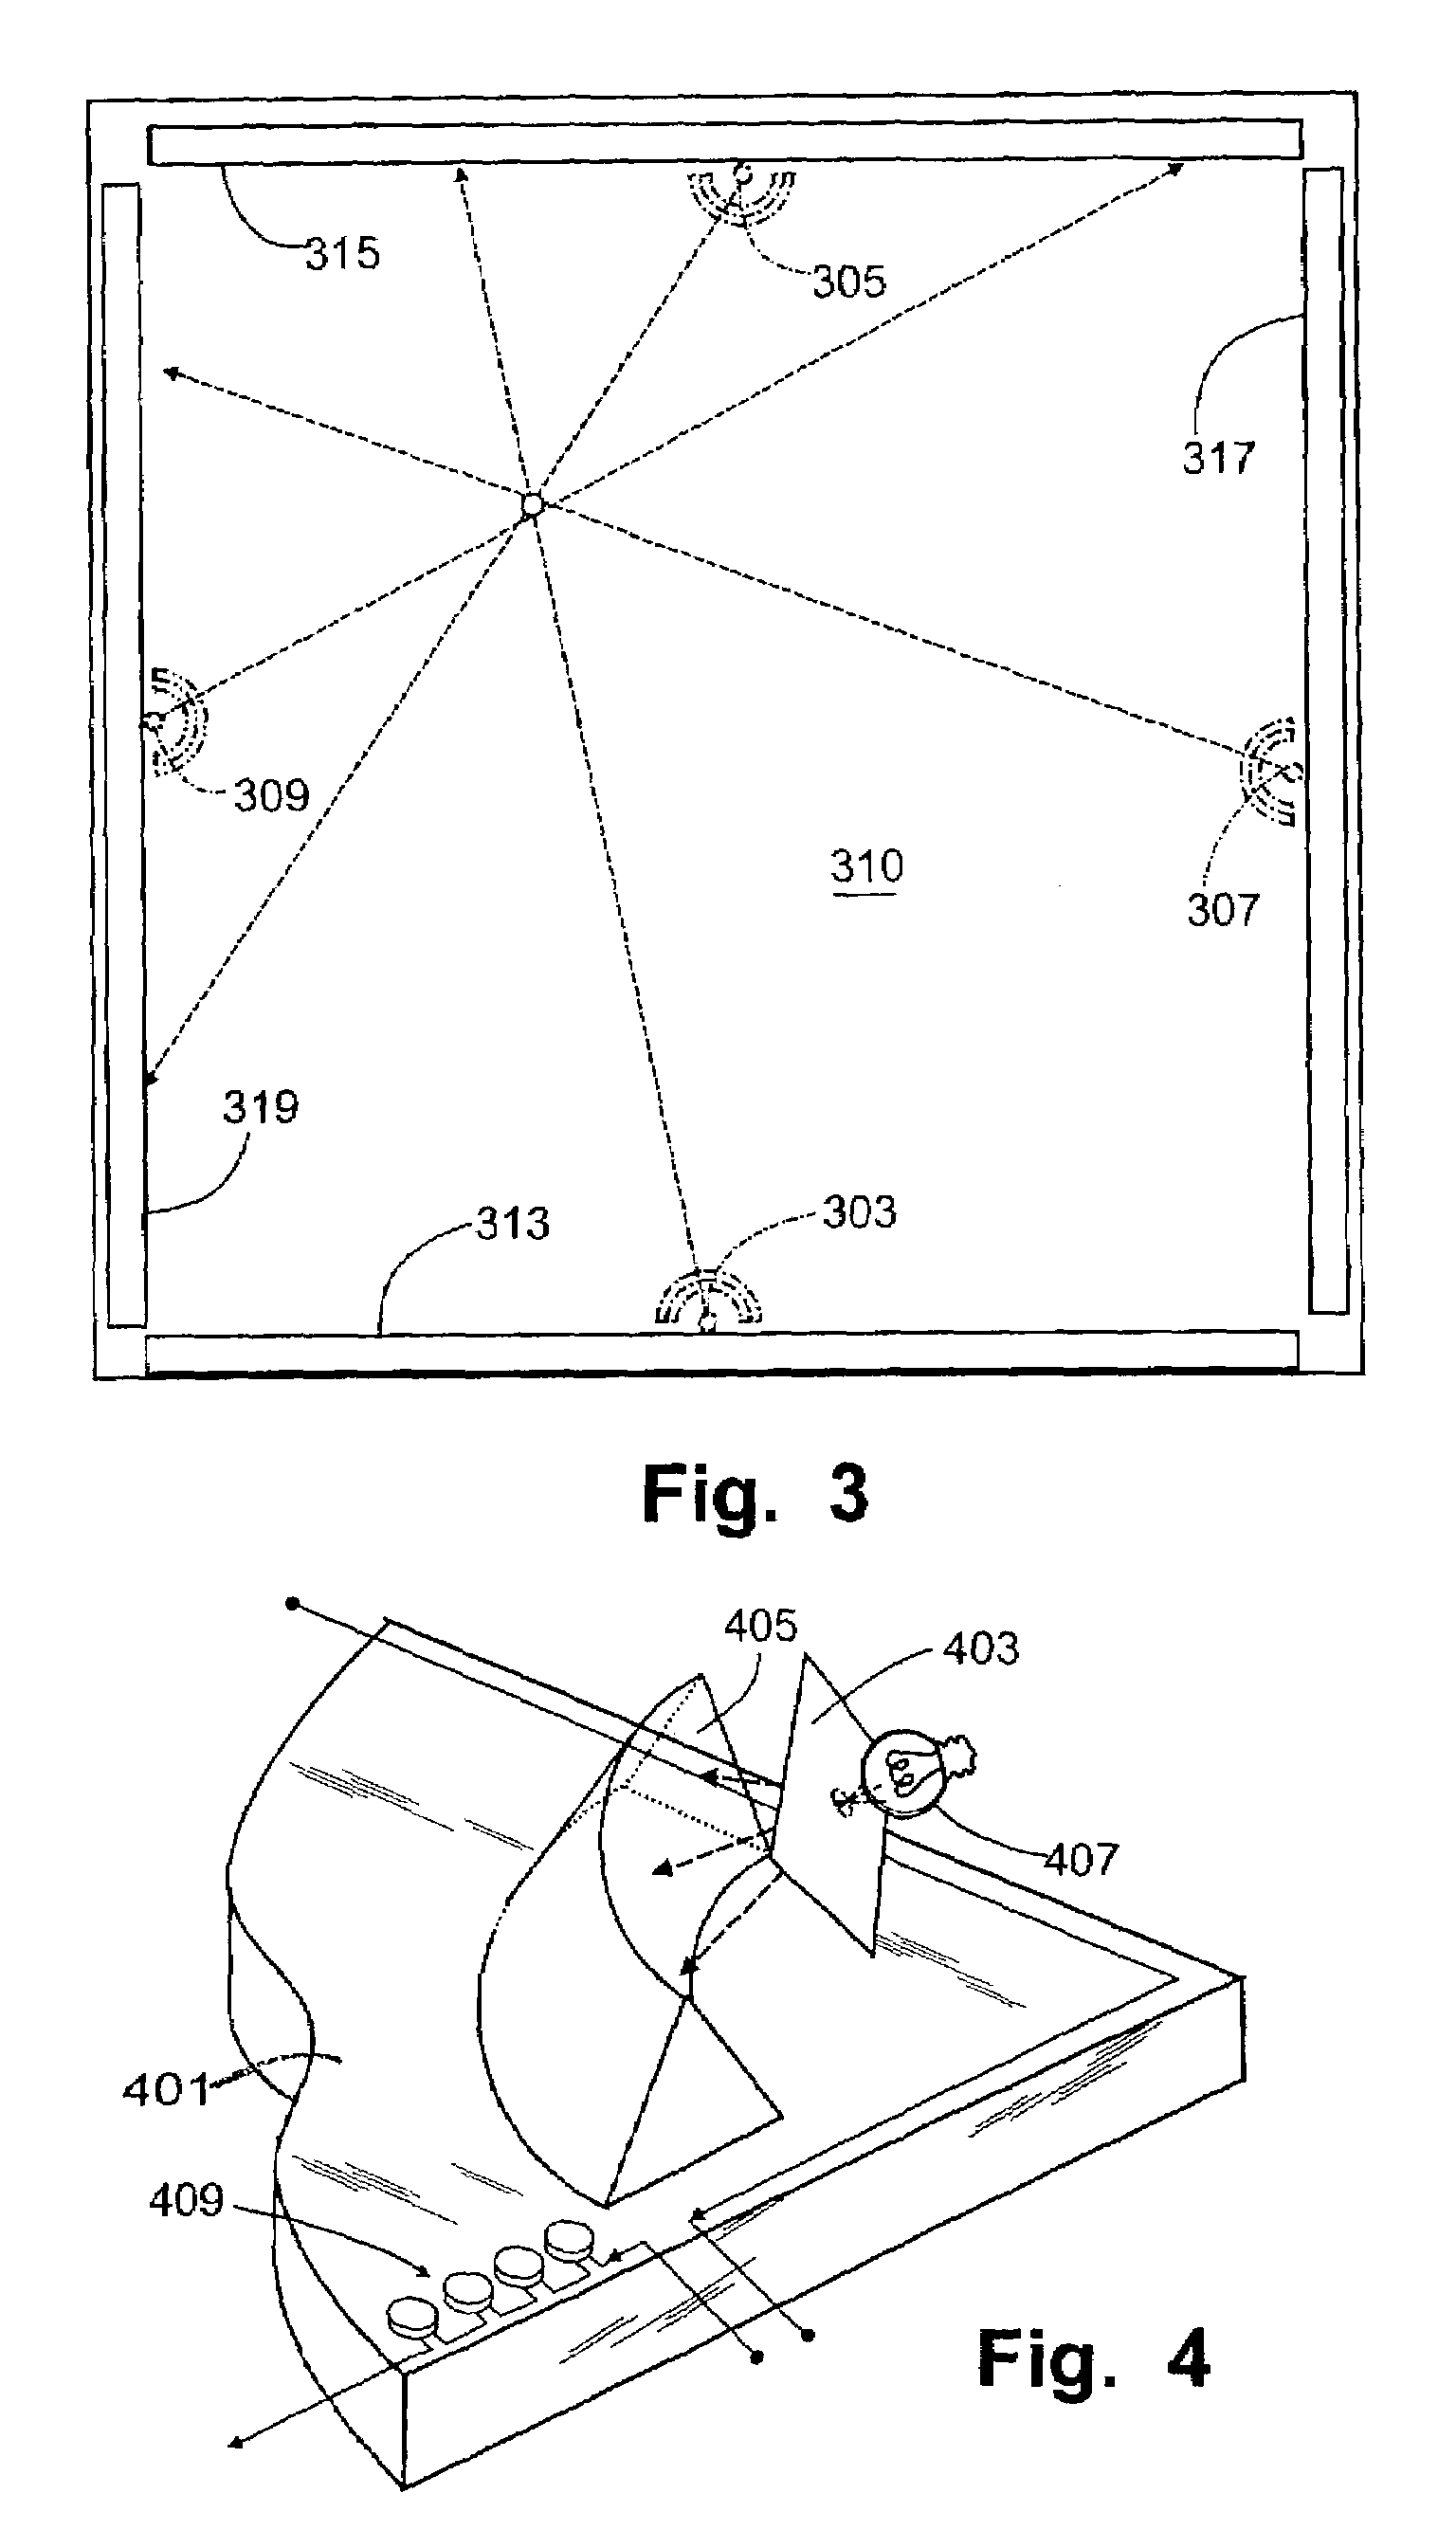 Input device based on frustrated total internal reflection